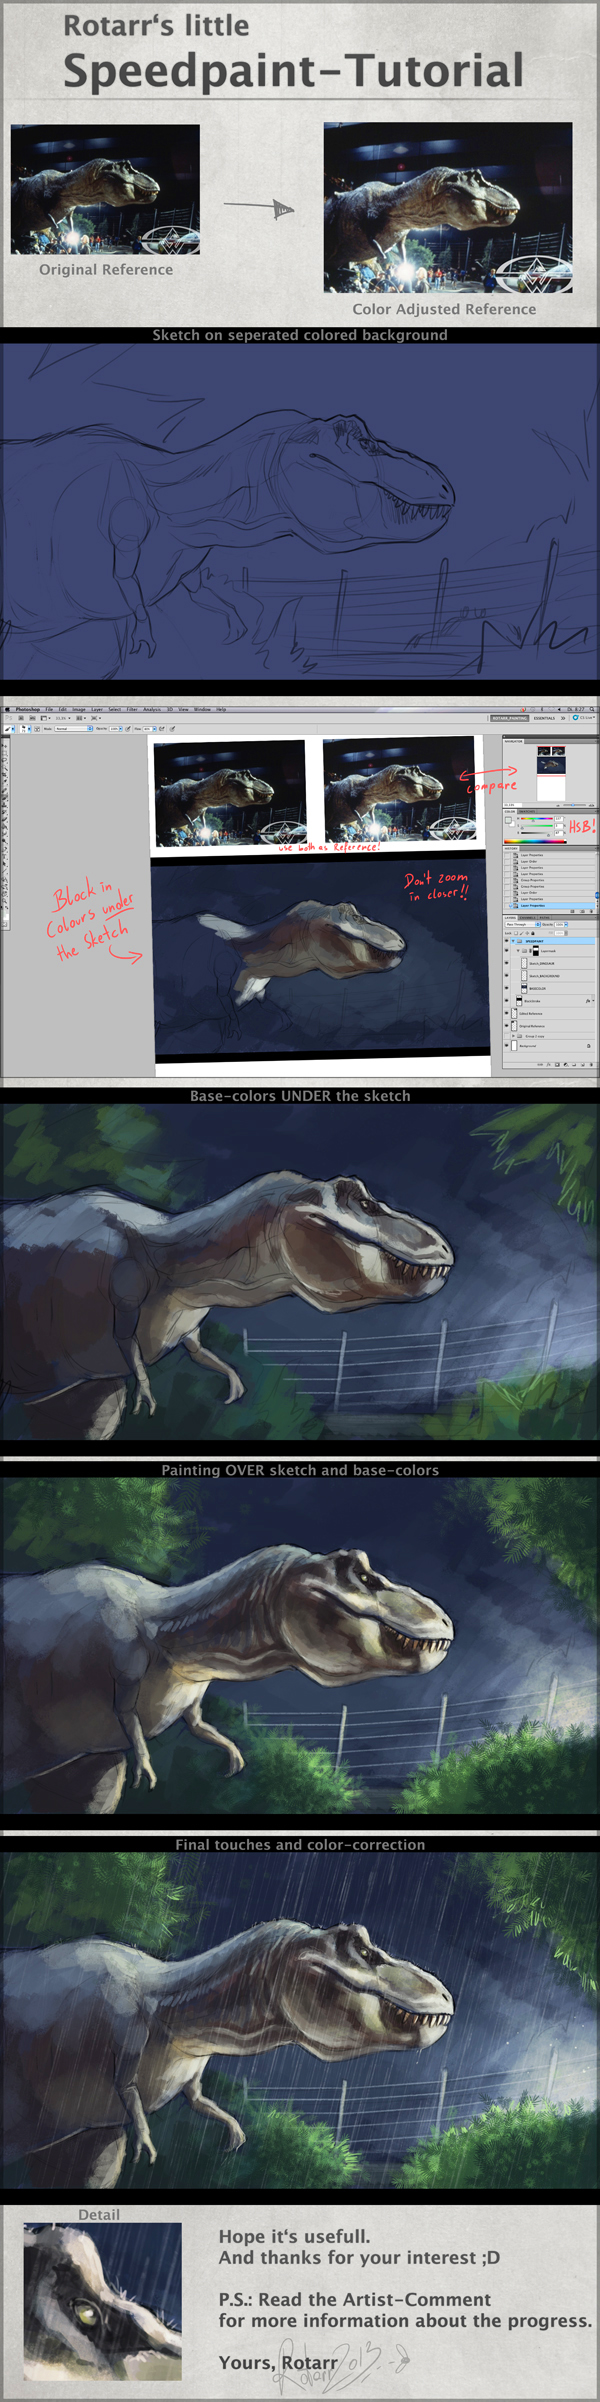 Speedpaint ideas: 4 amazing tips and resources to get inspired